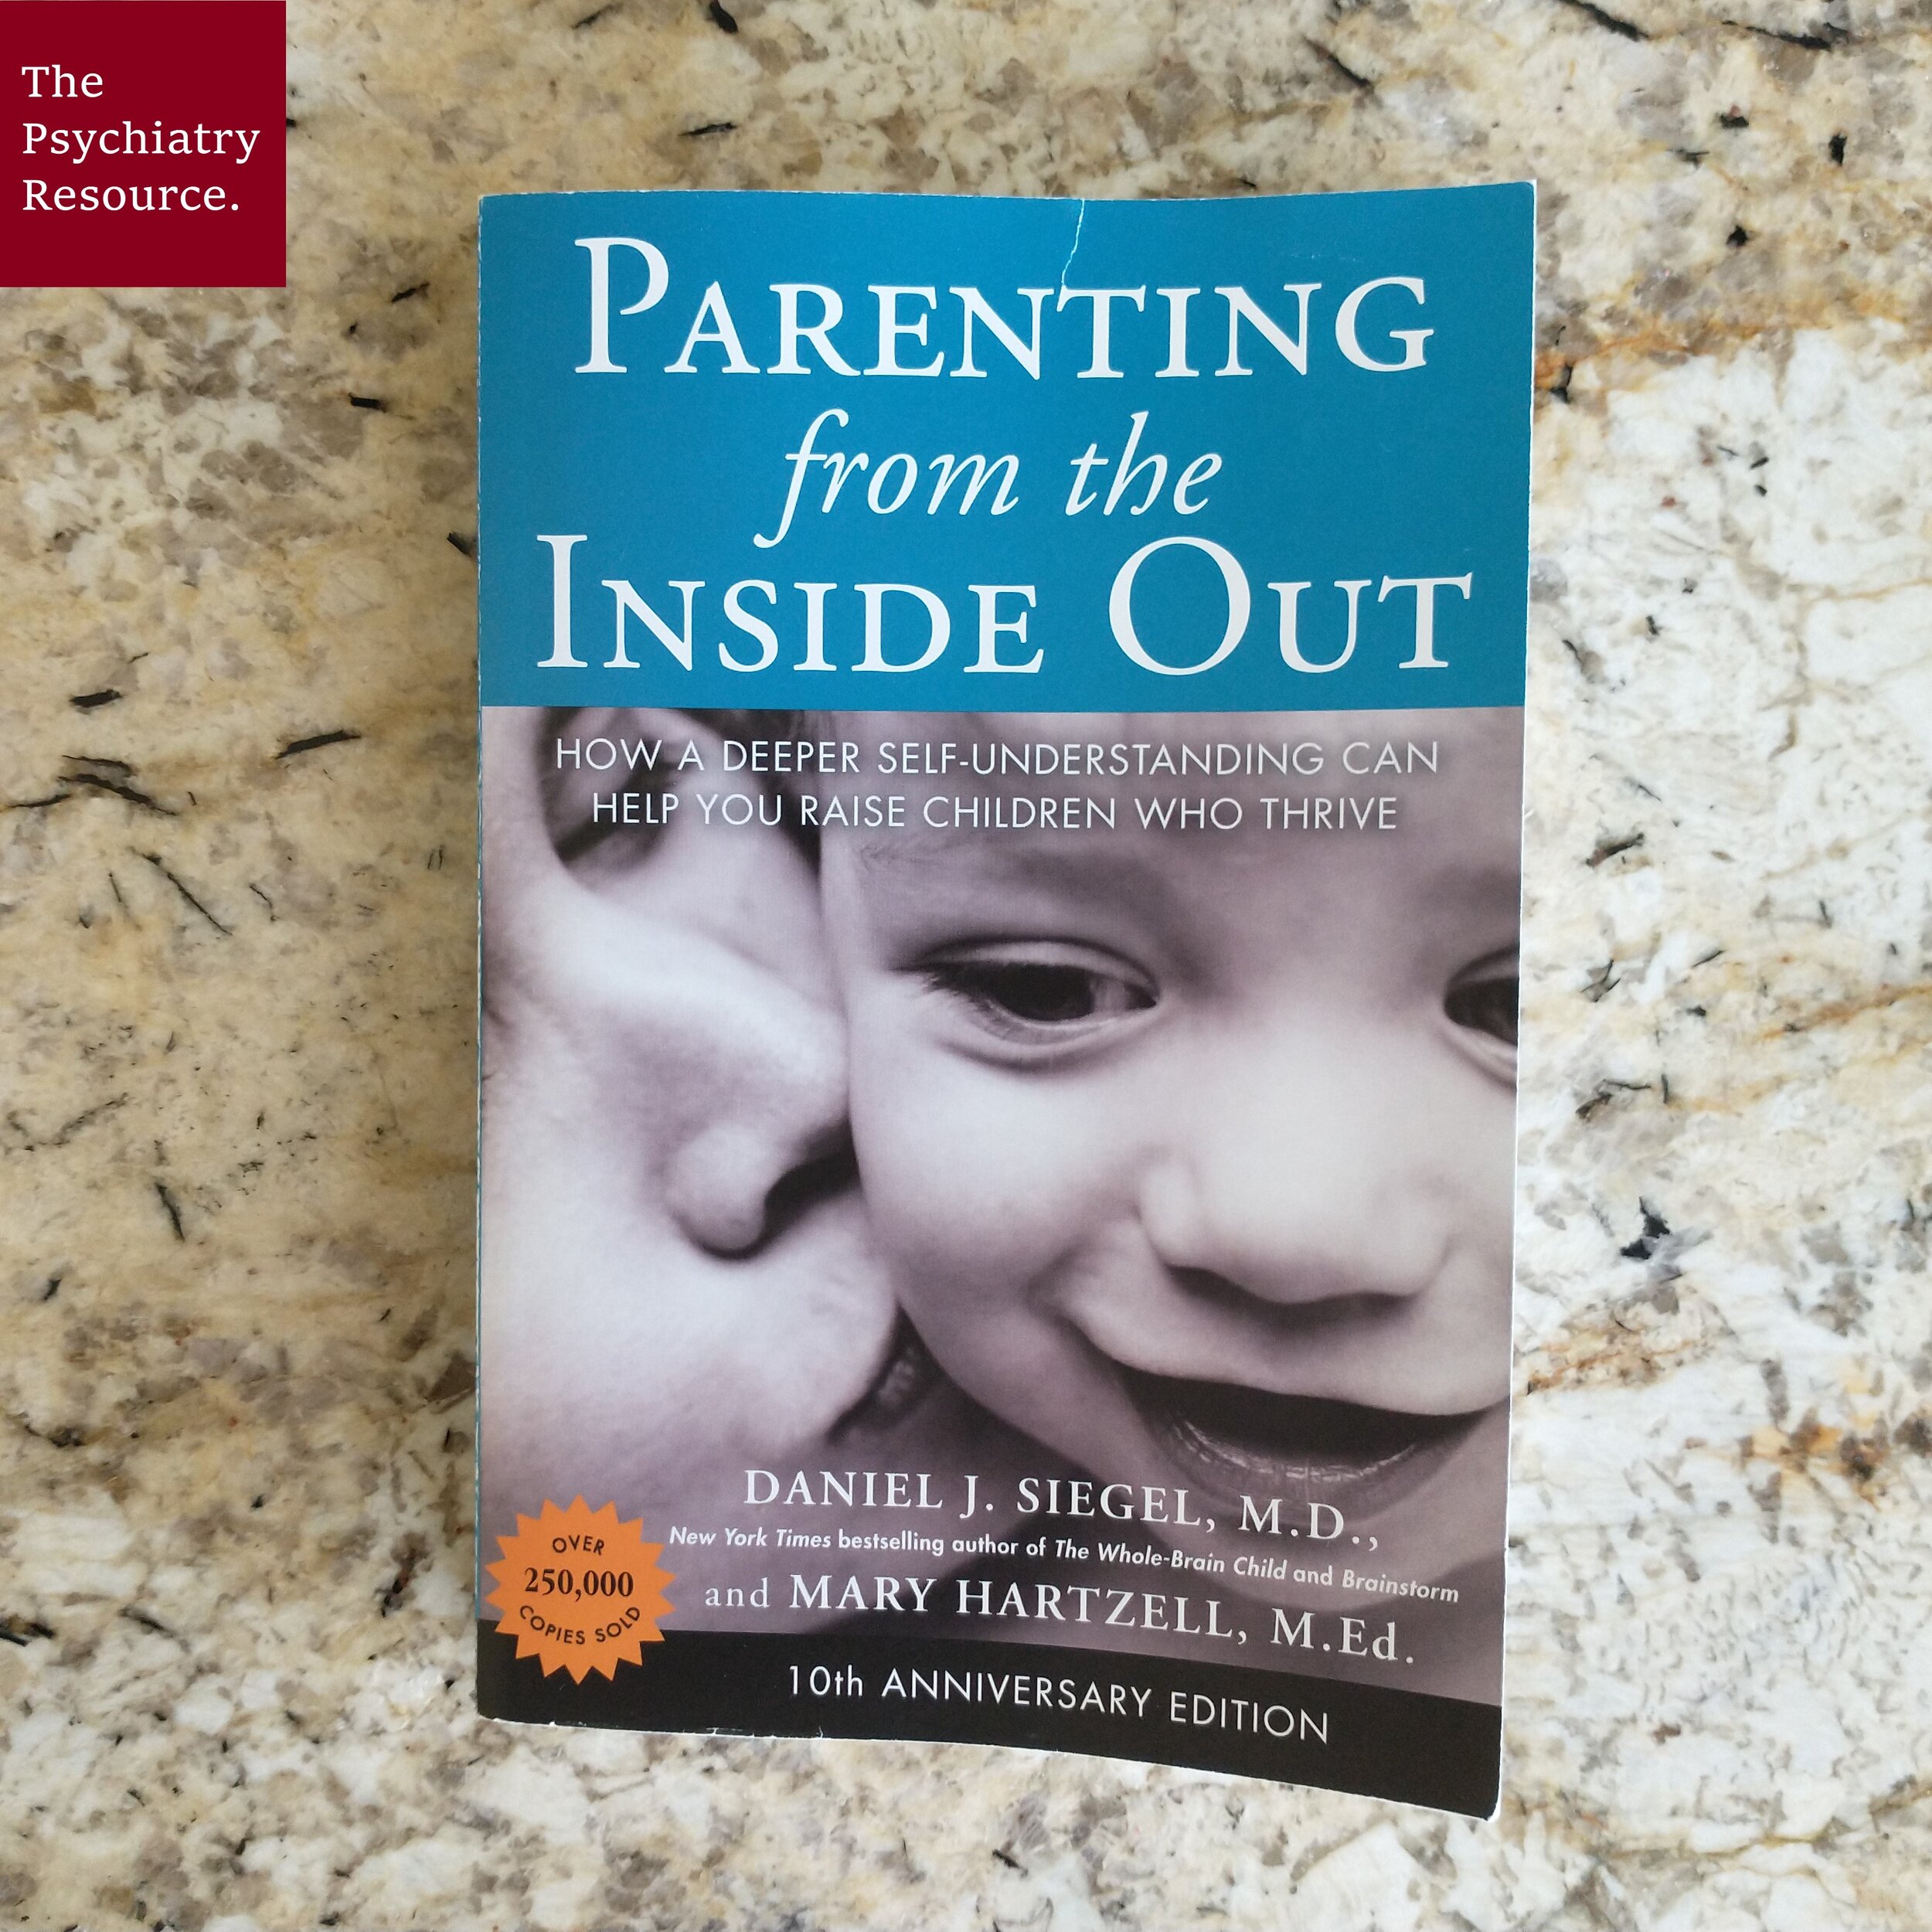 Book Review – Parenting from the Inside Out — The Psychiatry Resource